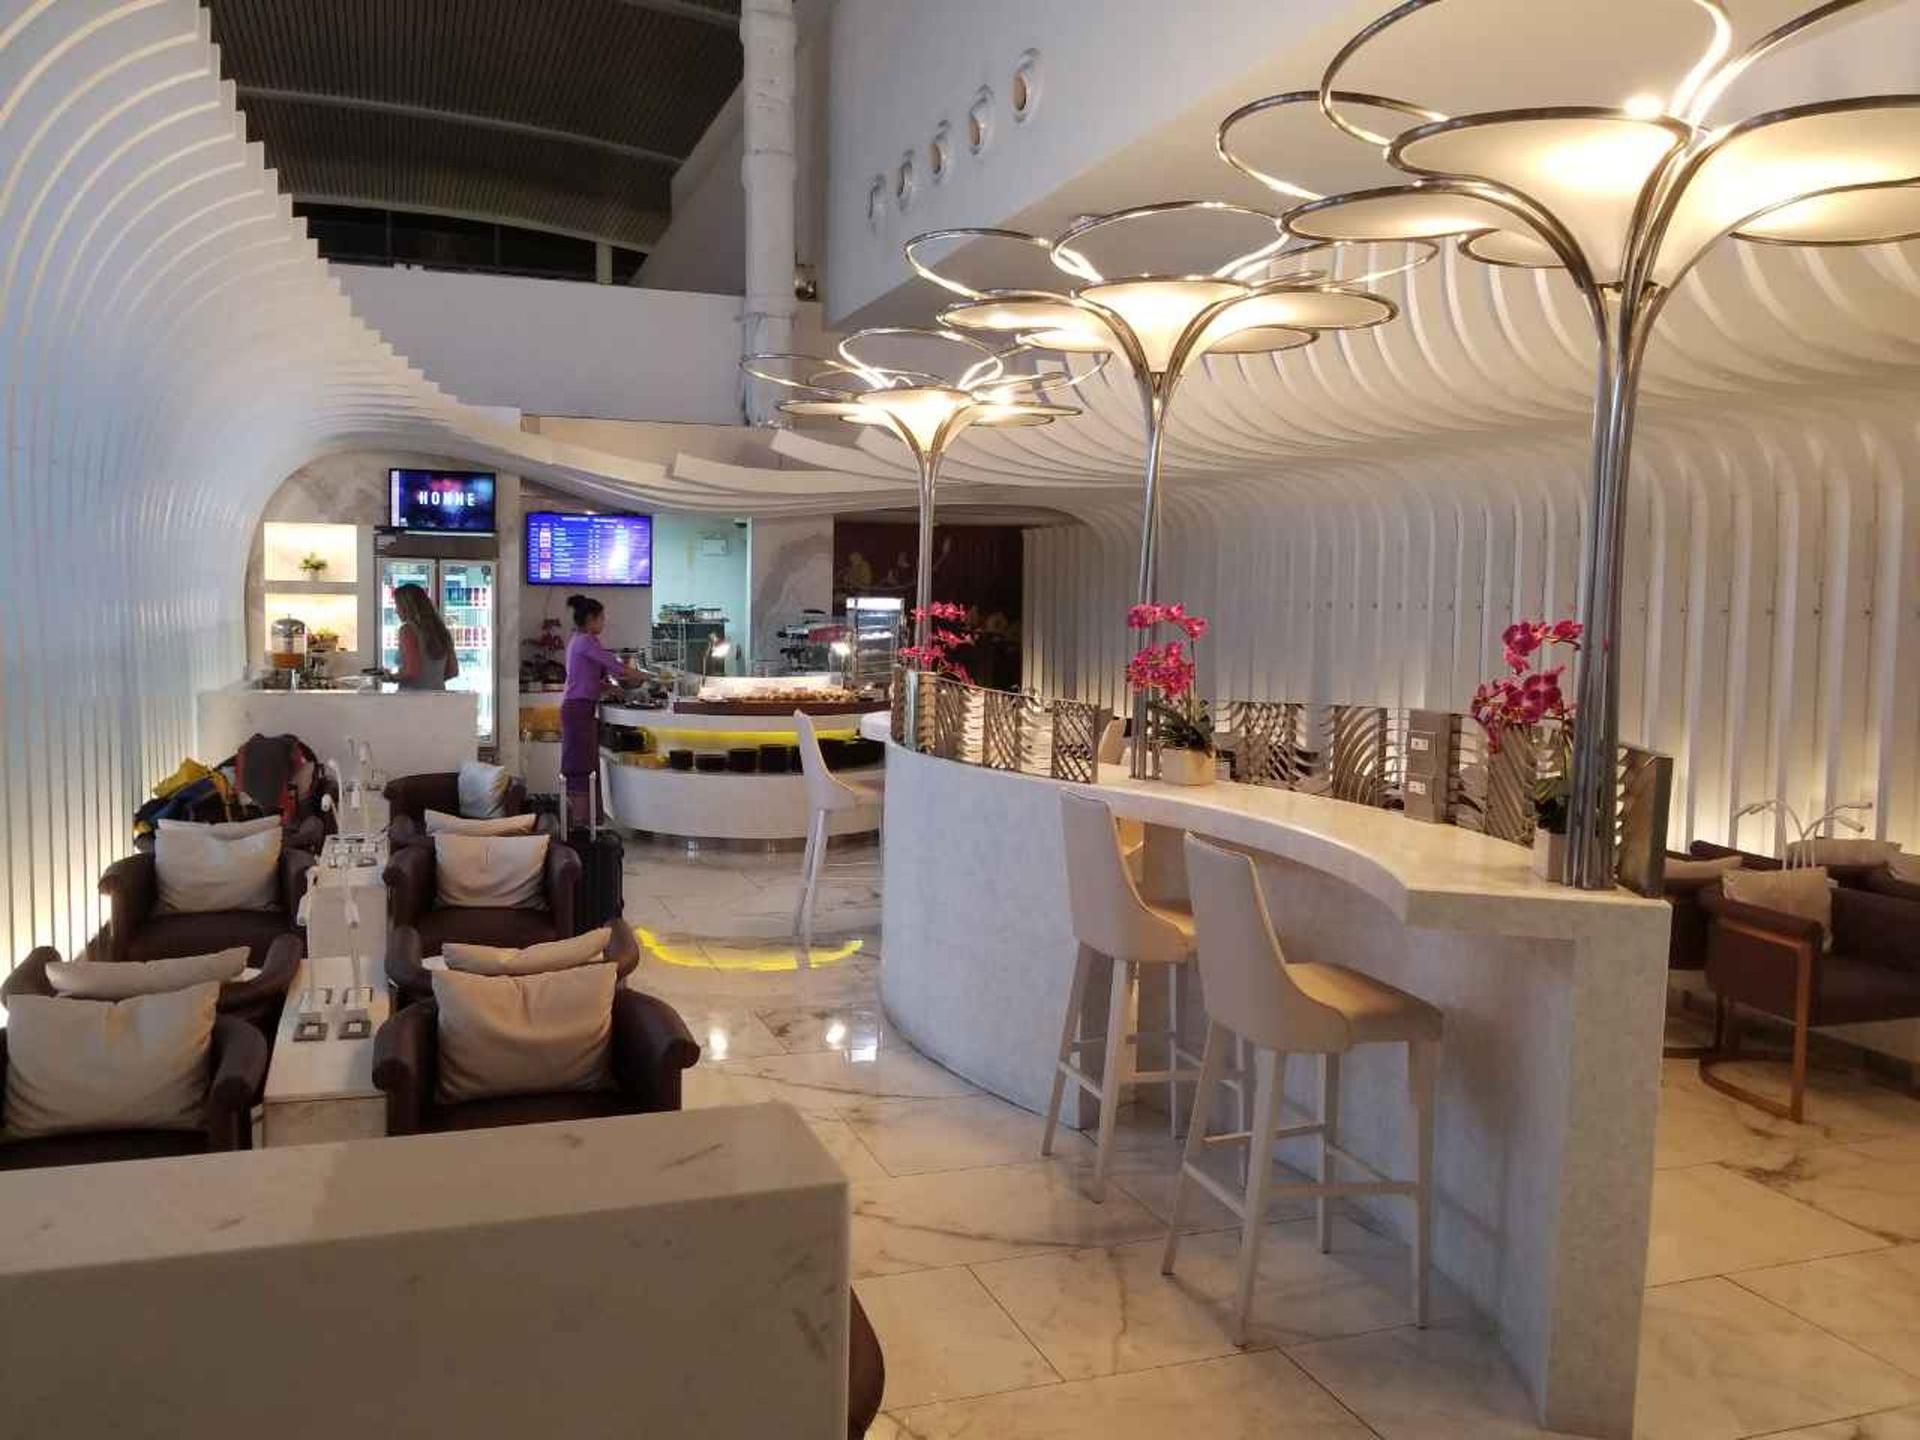 Thai Airways Royal Orchid Lounge image 3 of 9